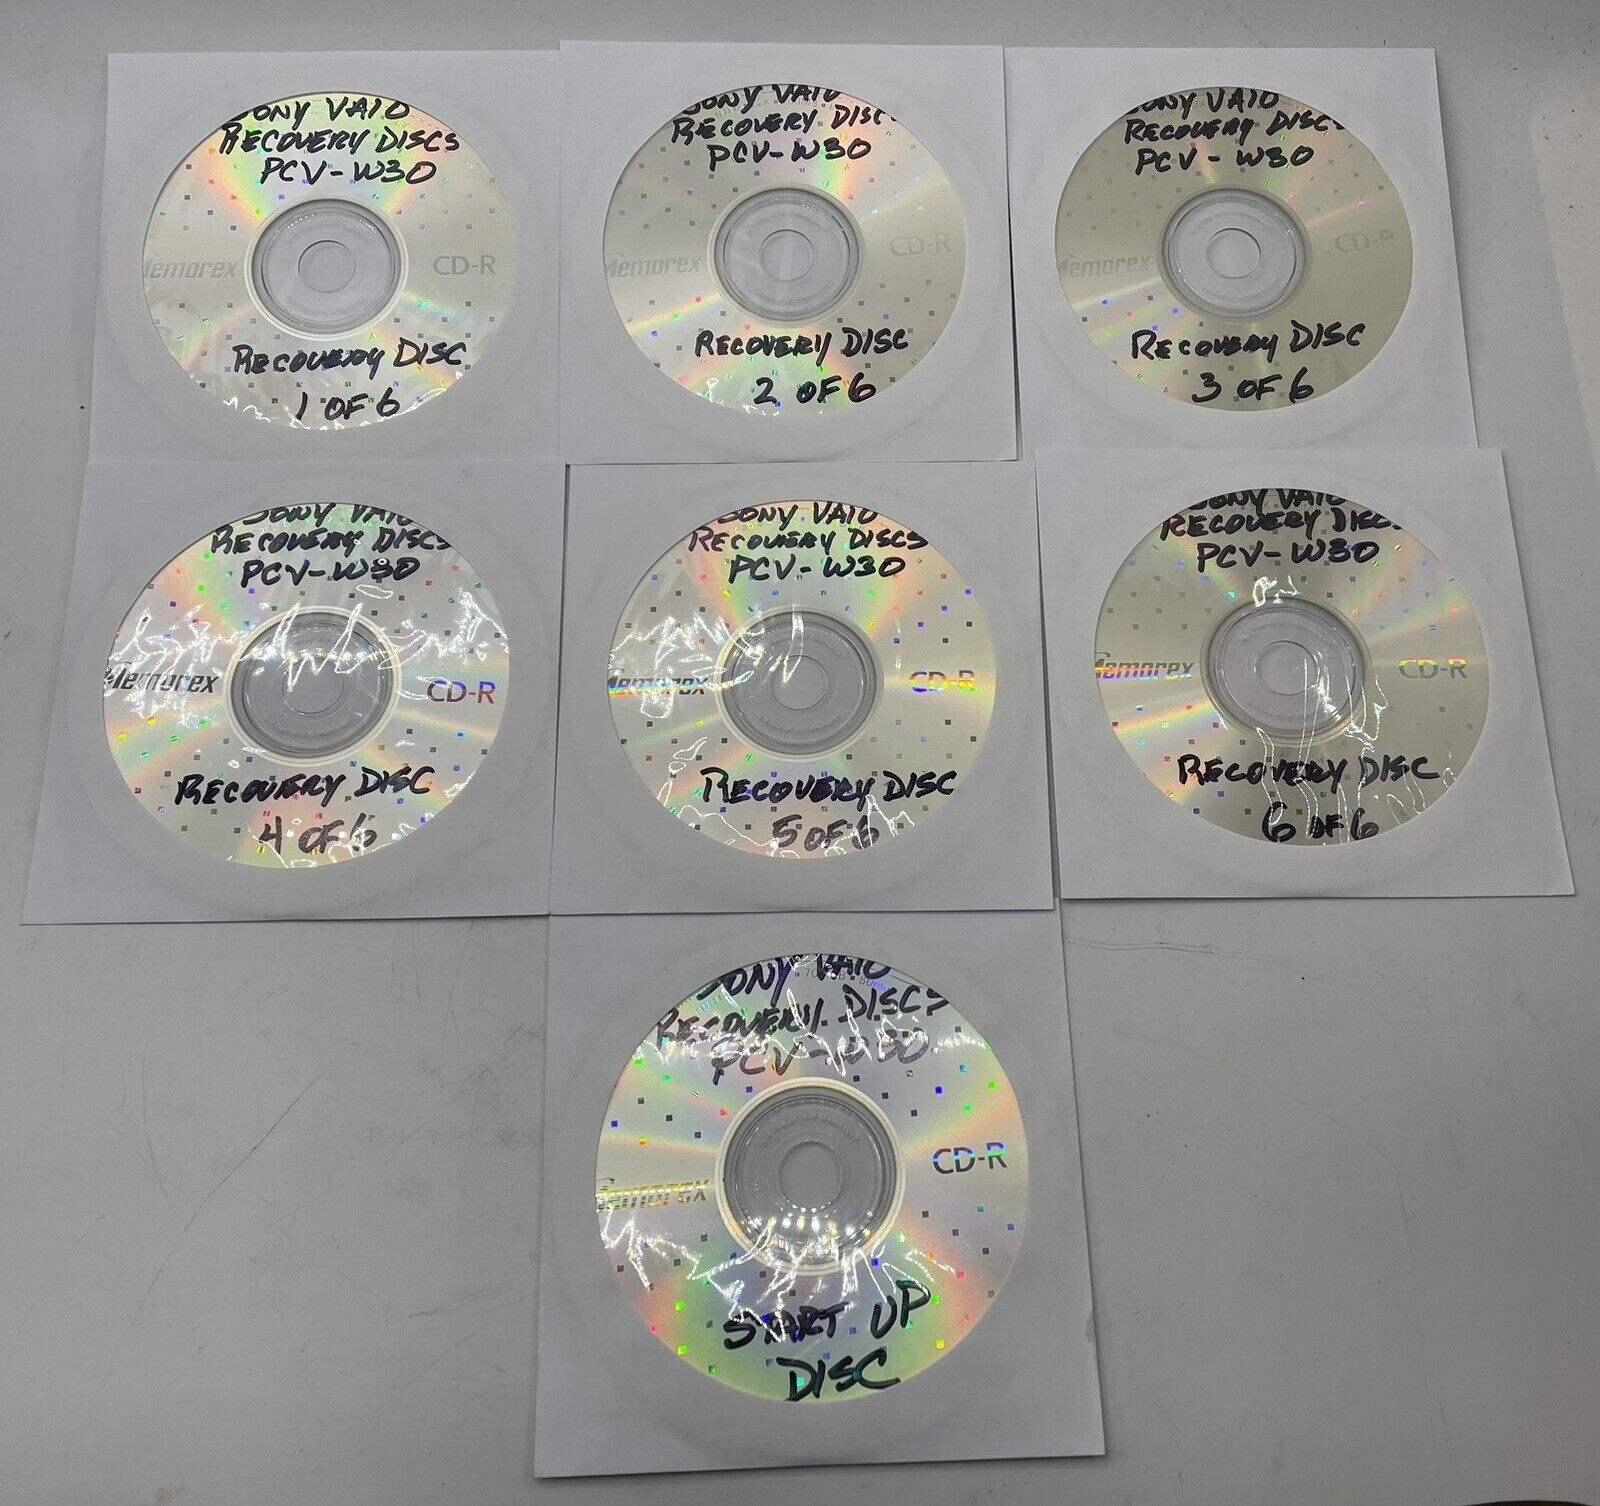 Sony VAIO Recovery Discs For PCV-W30 FULL SET System Recovery CDs - 7 Disc Set